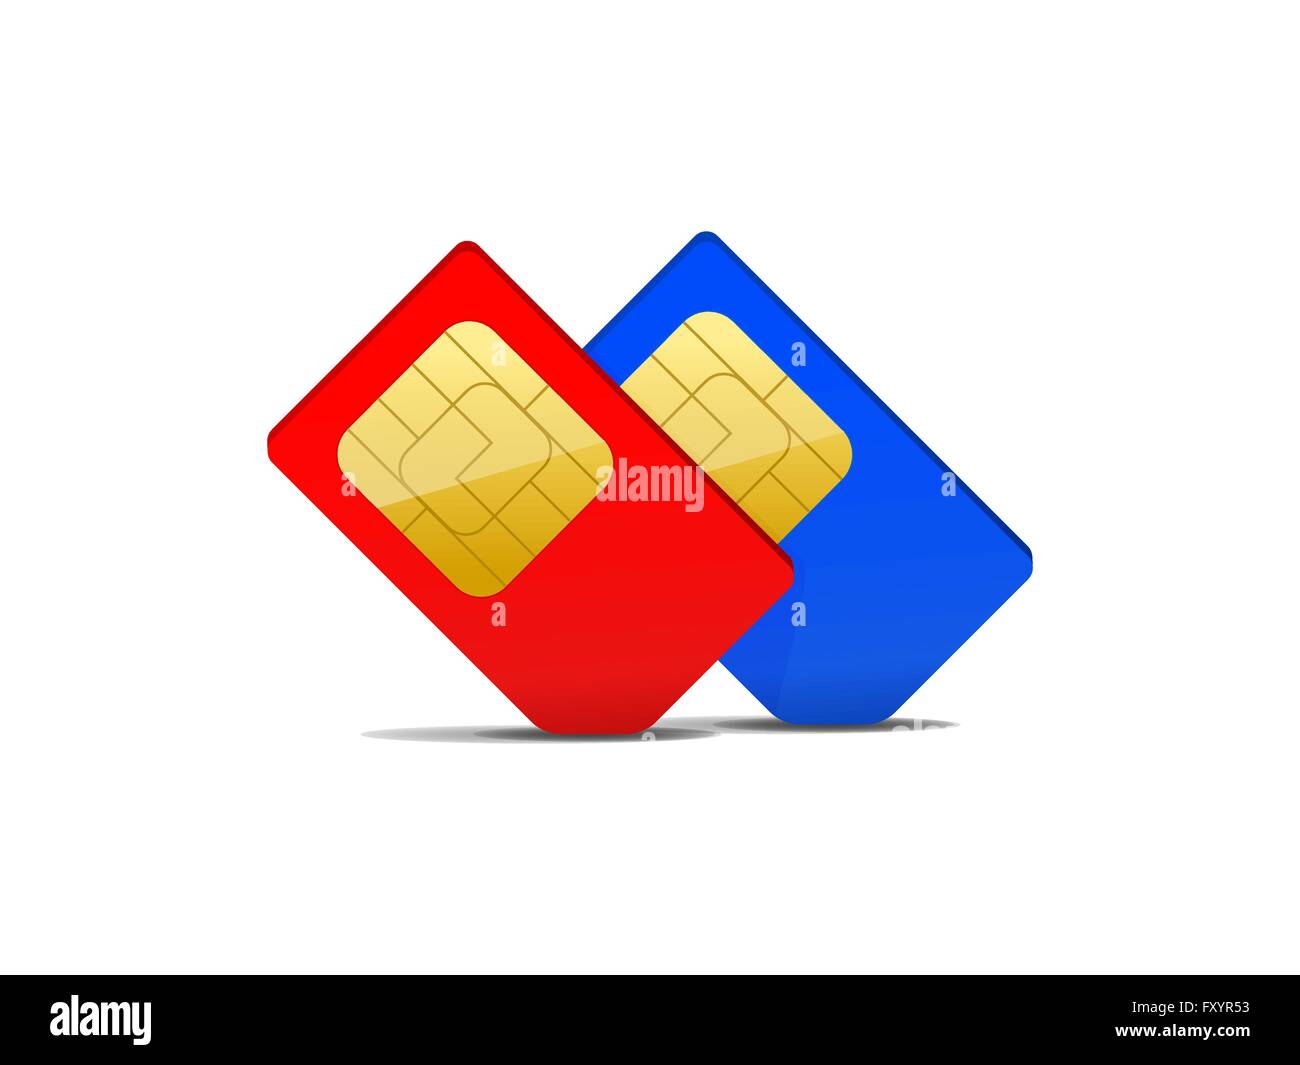 two sim card red and blue, vector illustration Stock Vector